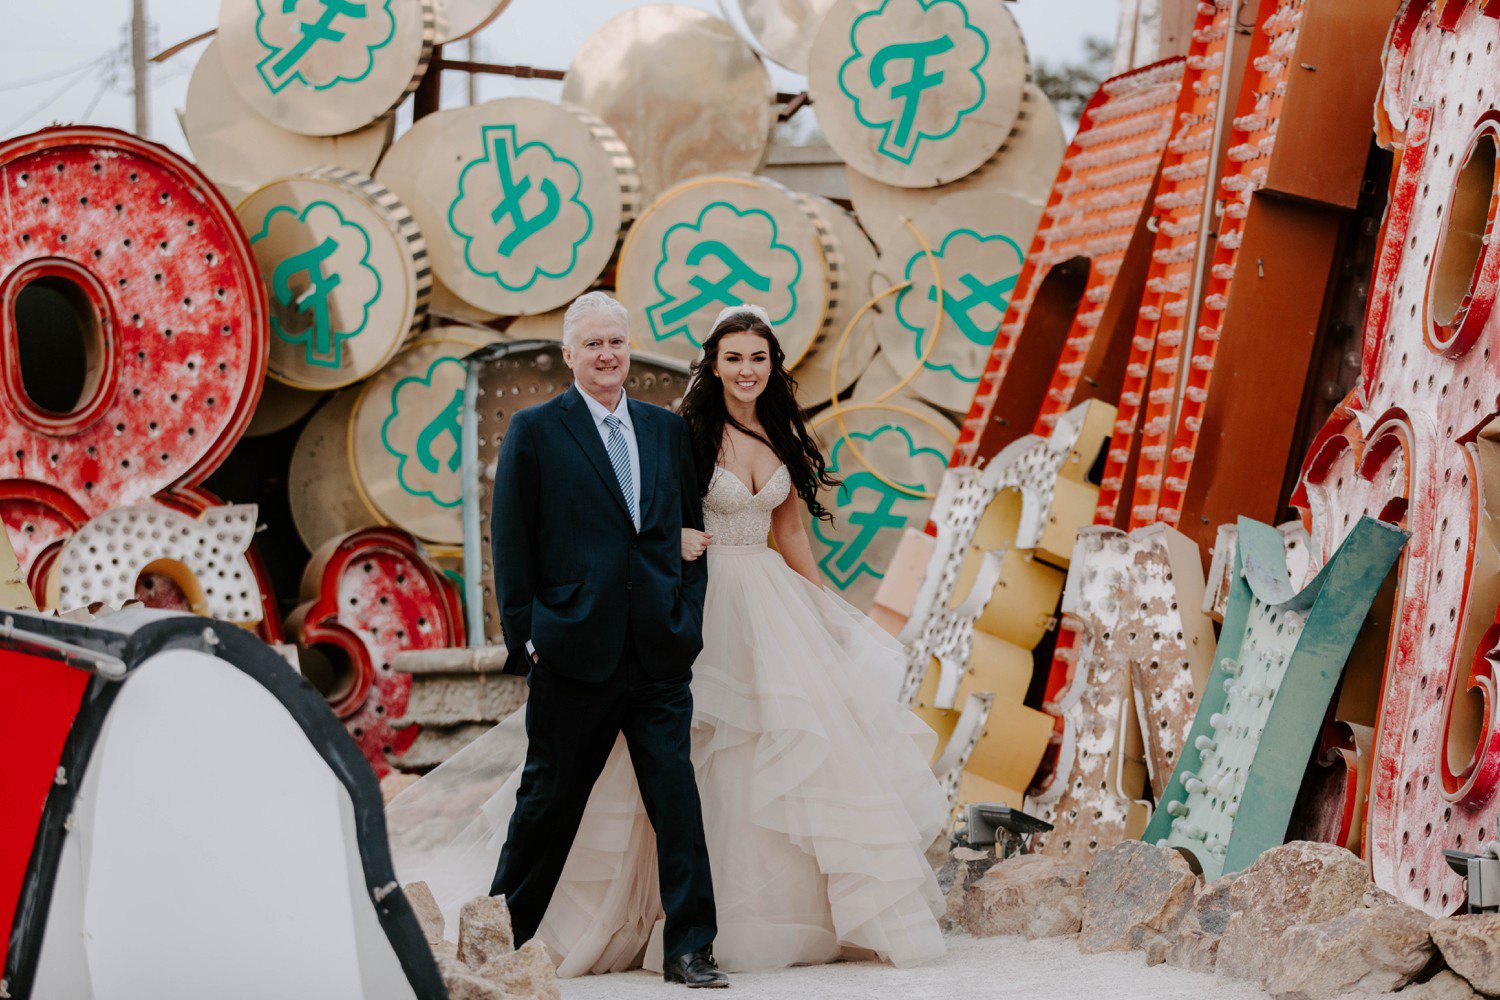 Wedding Ceremony at the Neon Museum